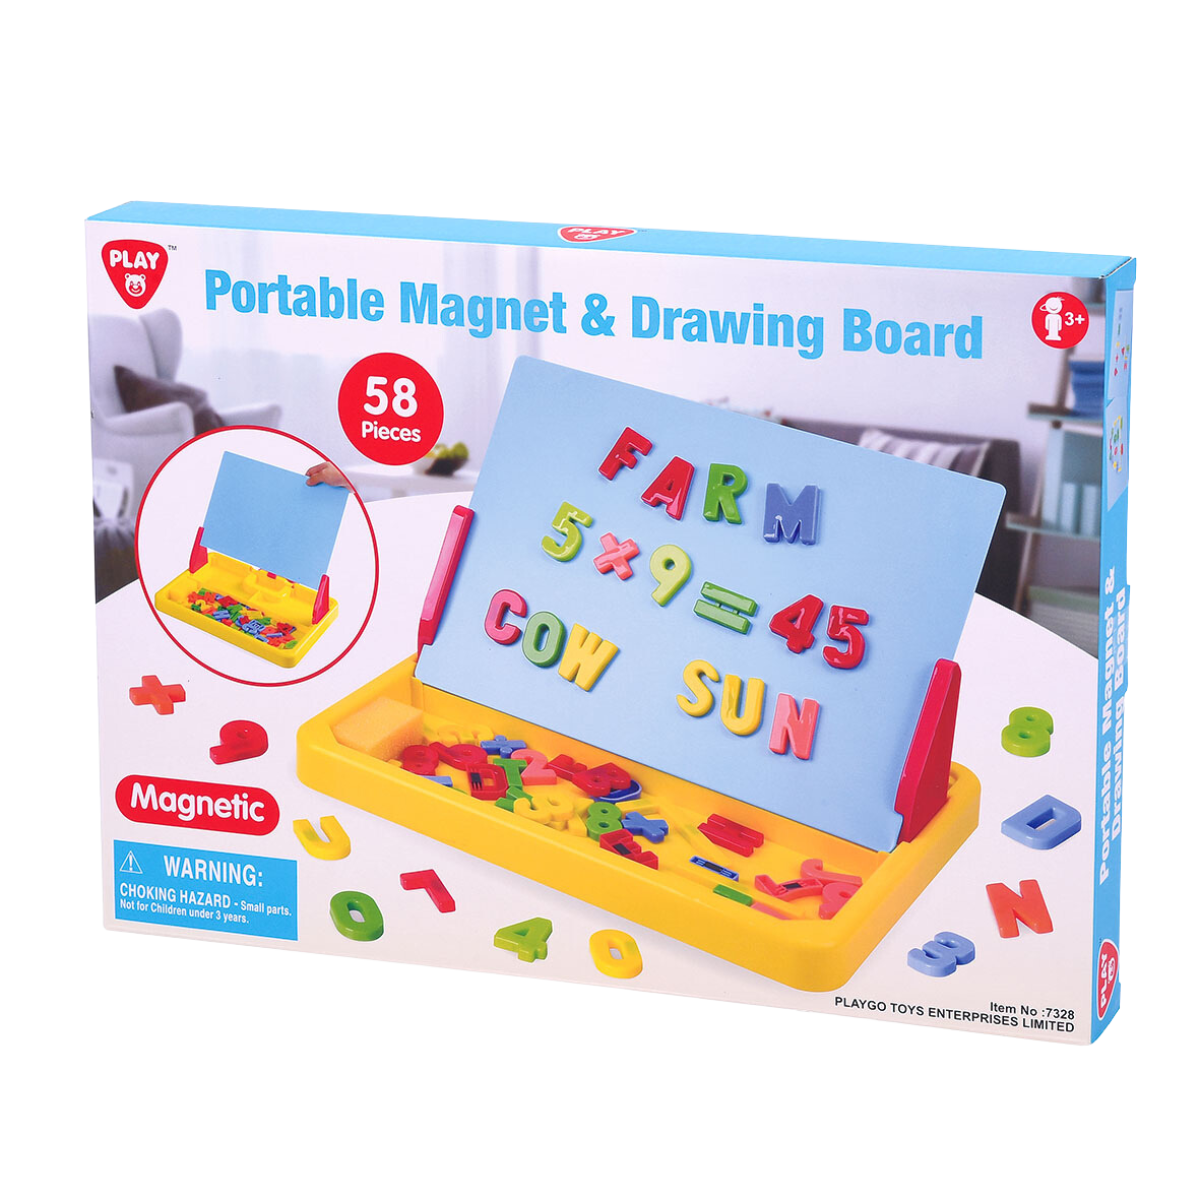 Portable Magnet &amp; Drawing Board